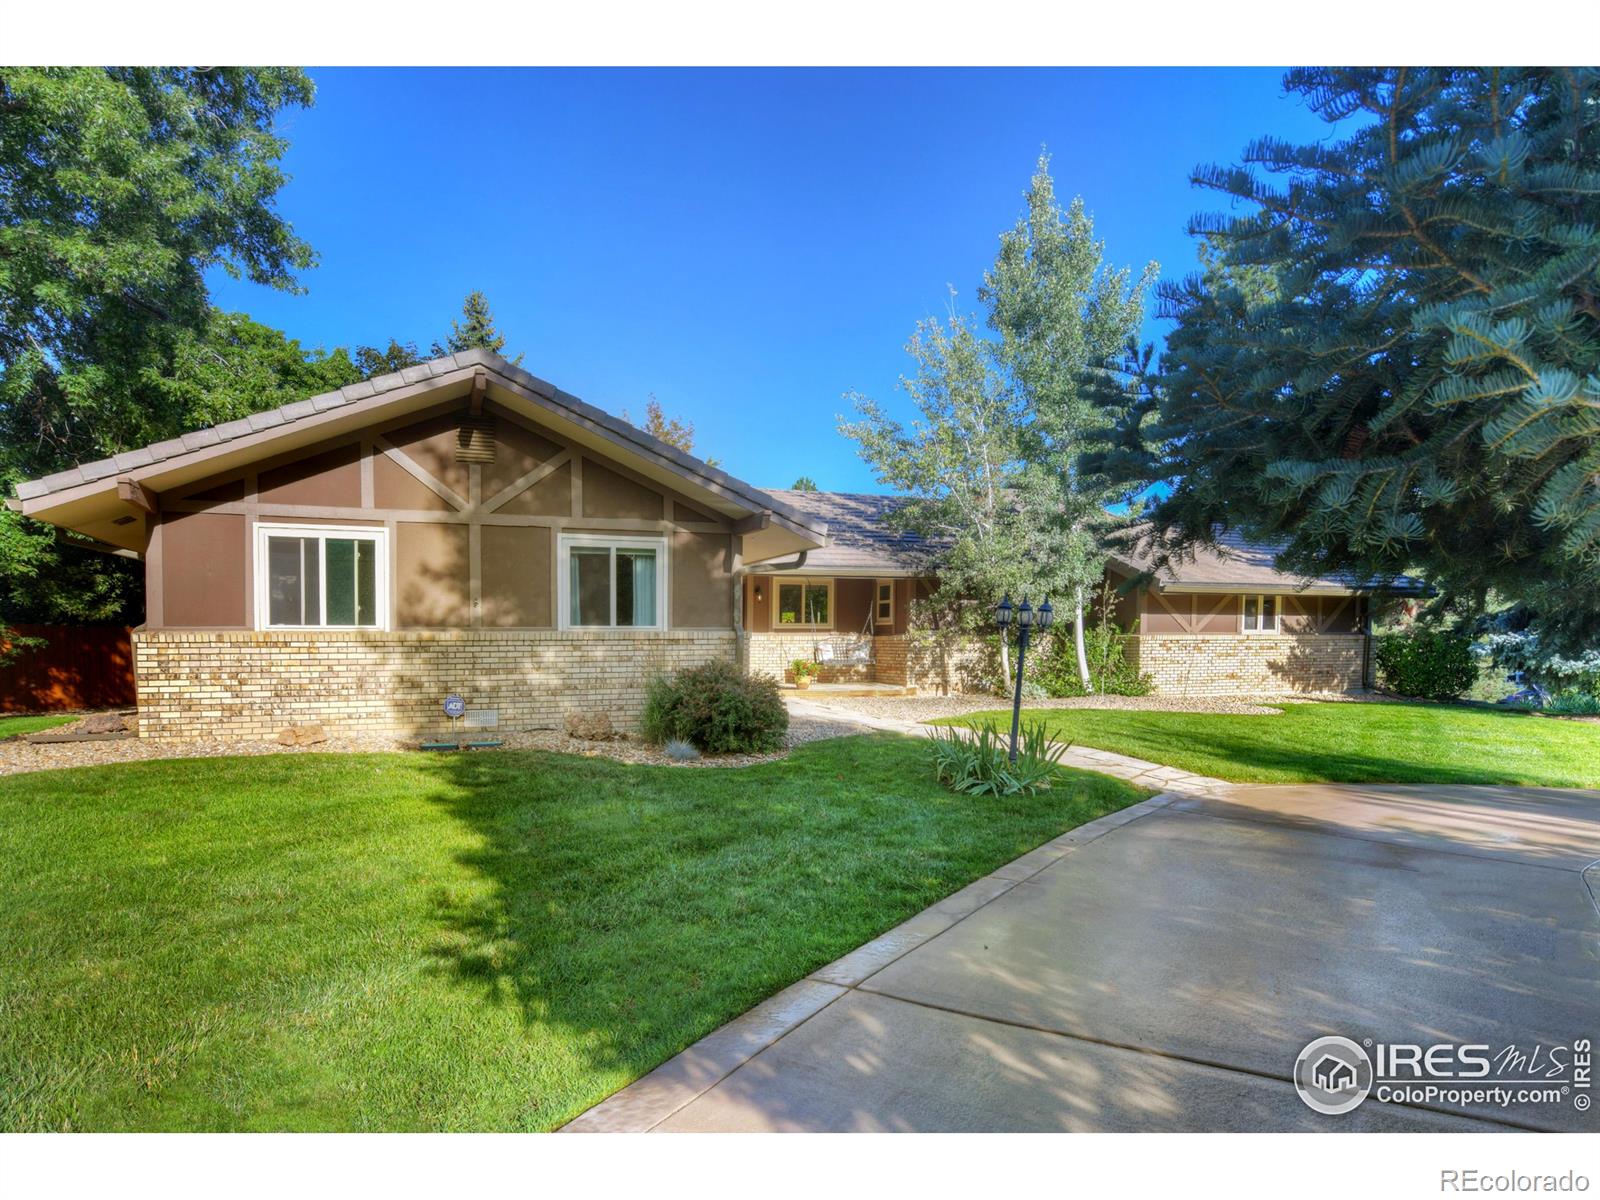 5291  Spotted Horse Trail, boulder MLS: 123456789994205 Beds: 5 Baths: 4 Price: $1,263,999